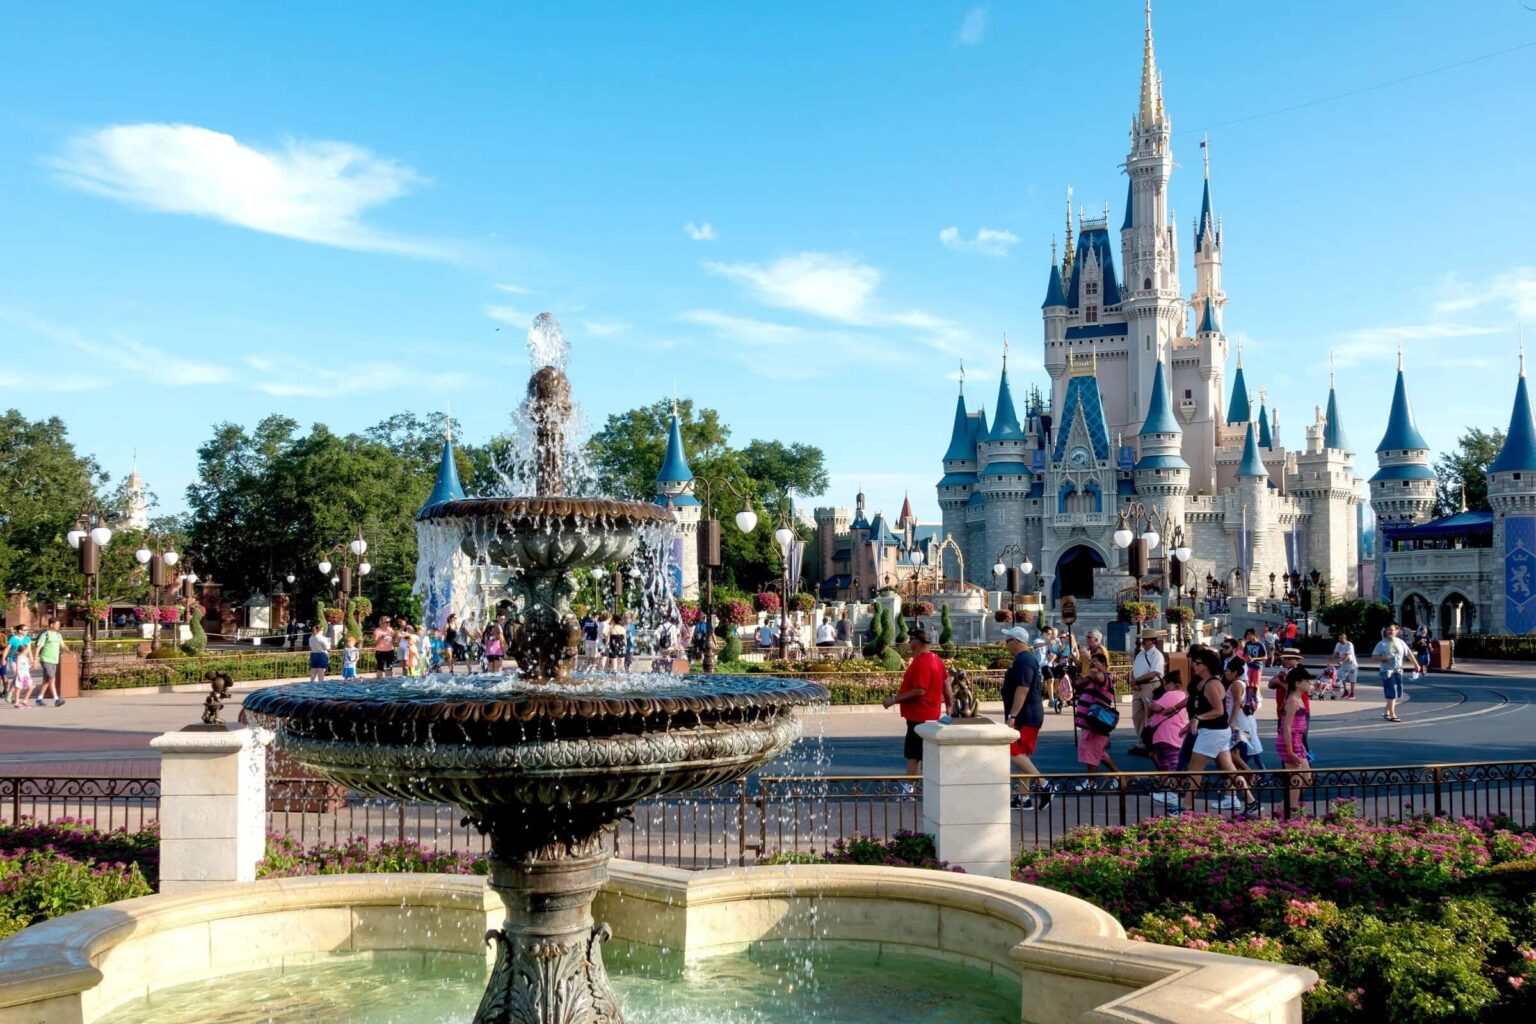 Ultimately, the choice is up to you on whether or not going to Disney World Parks. Here's what there is to know about the reopening.